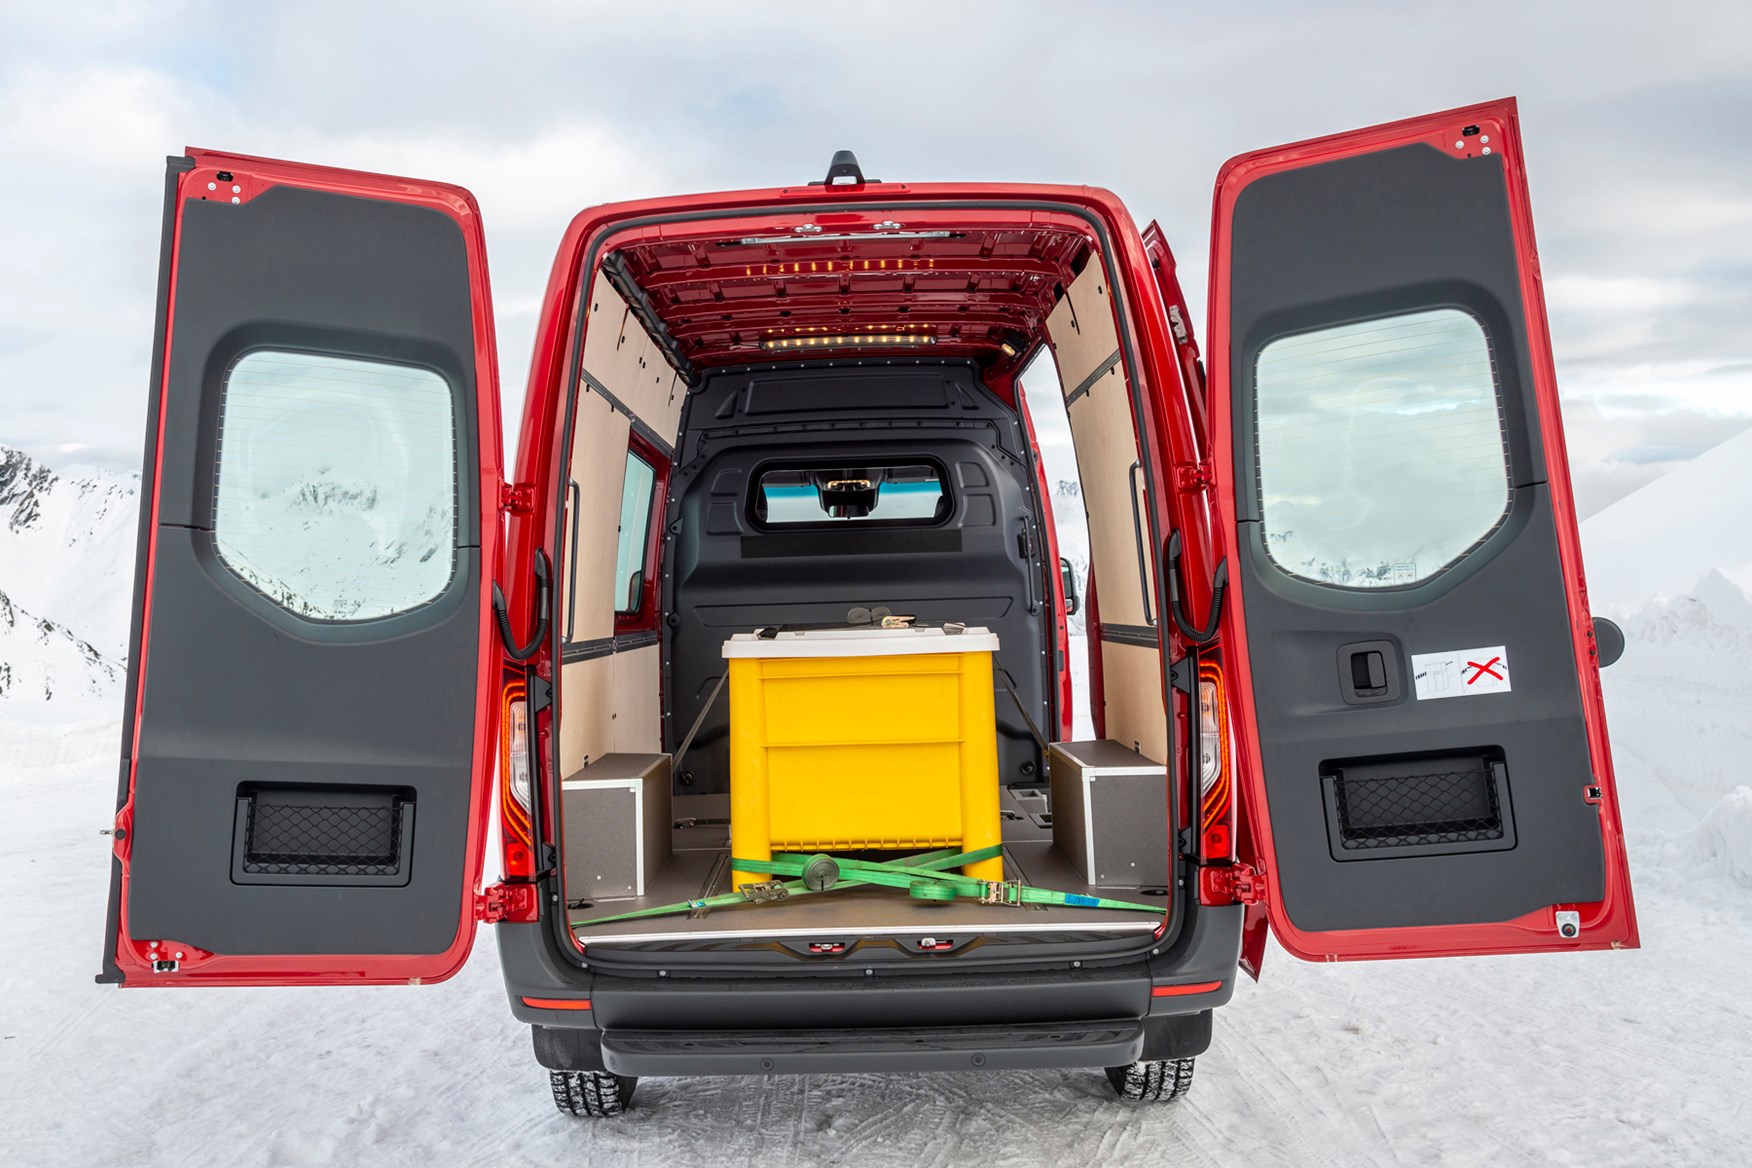 Mercedes Sprinter 4x4 has a maximum payload of 1,220kg in some iterations